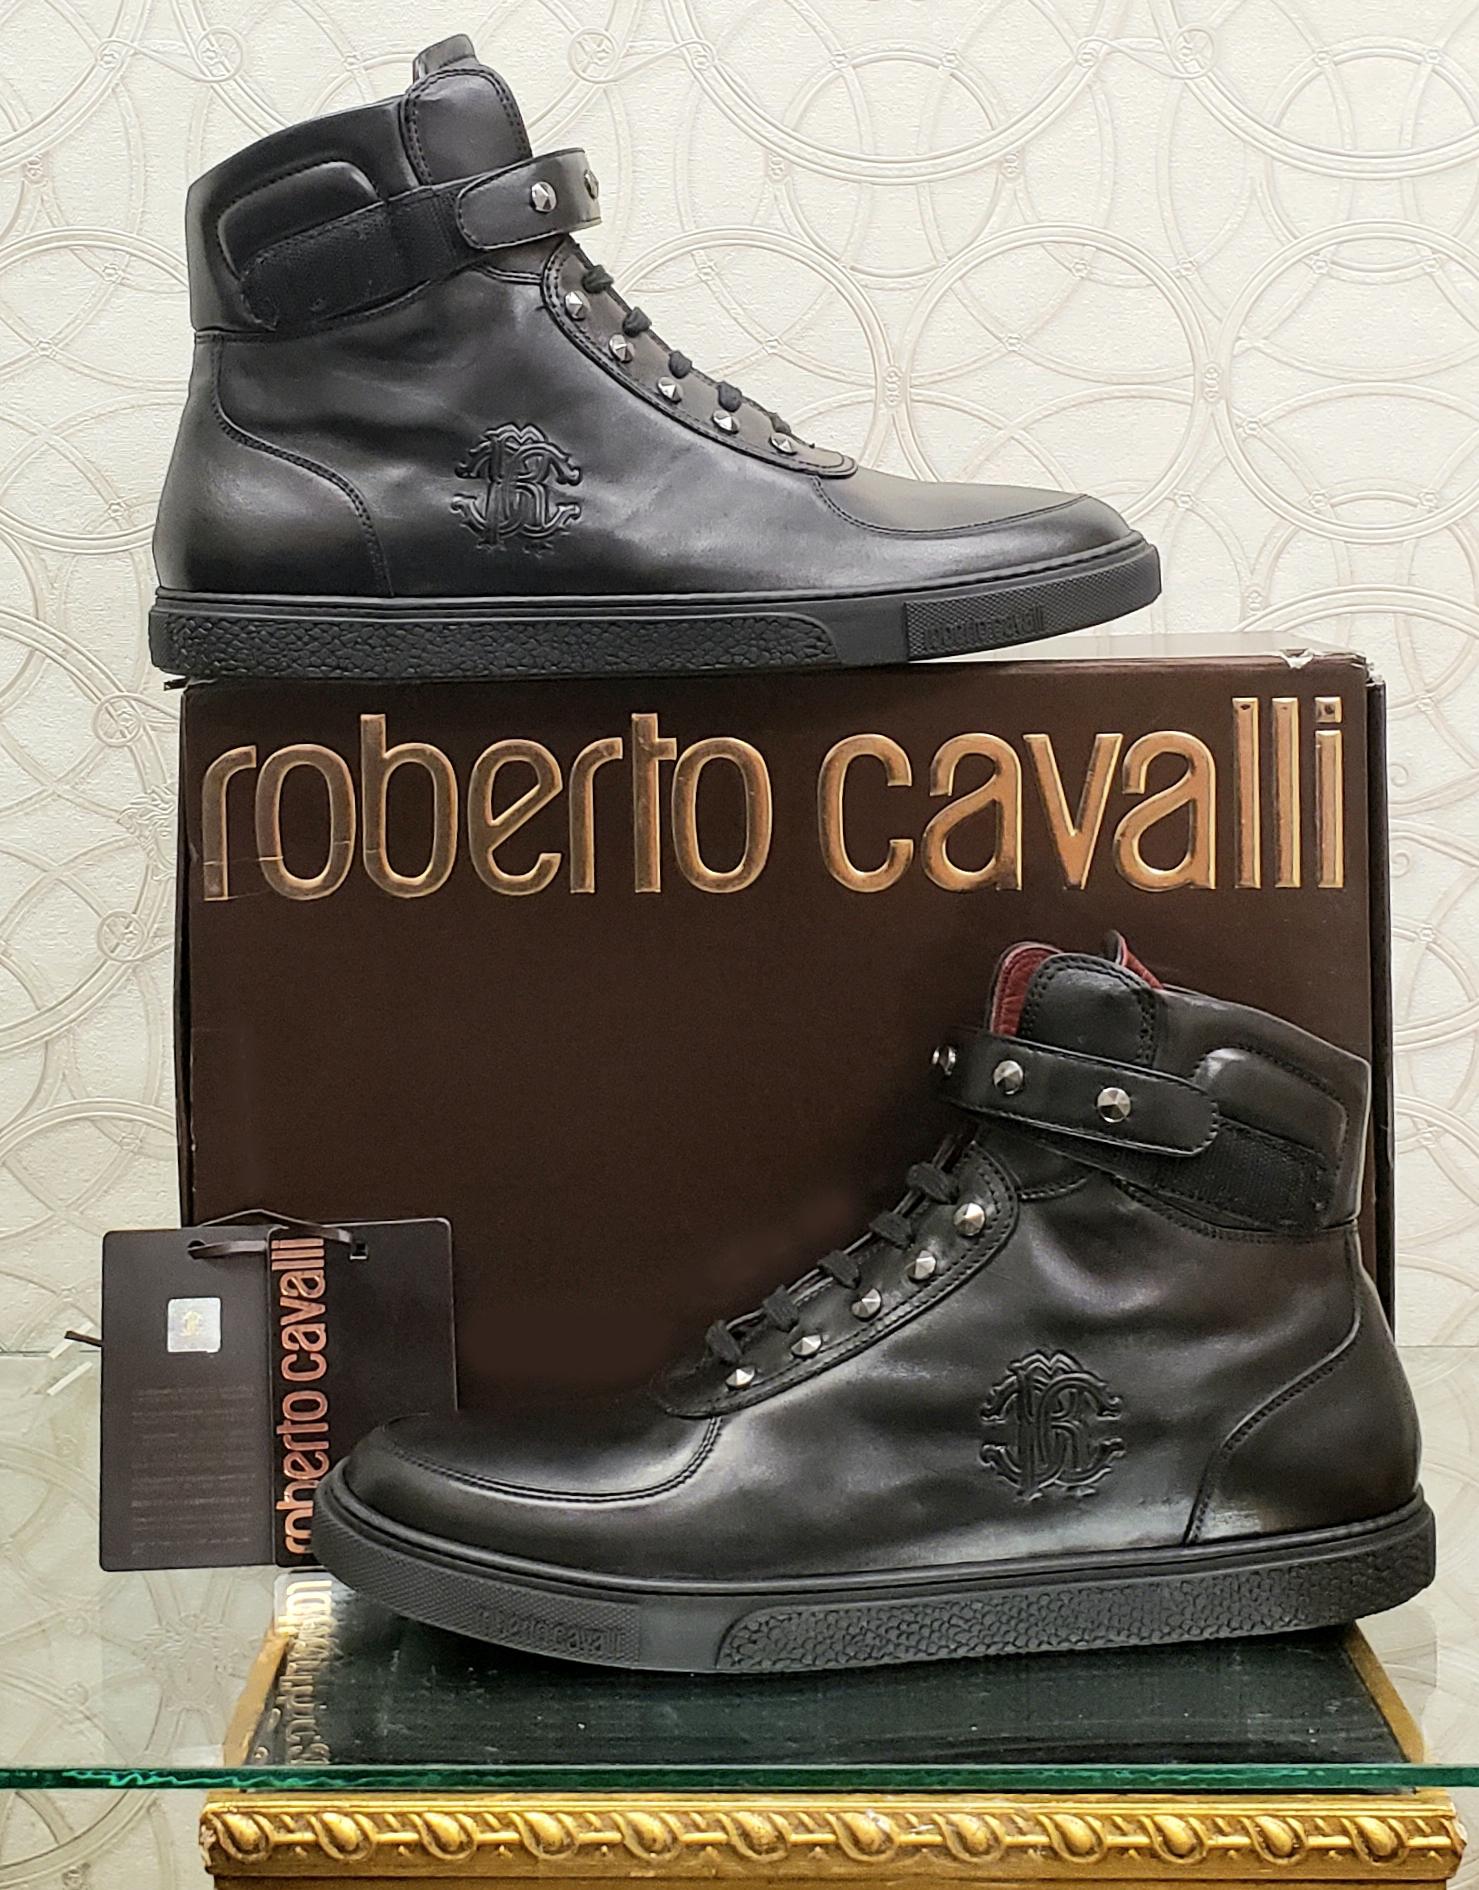 ROBERTO CAVALLI 



MEN'S STUDDED HIGH TOP SNEAKERS

These all weather sneakers is constructed from premium materials with incredible details for a comfortable luxurious fit.

Color: Black

Content: 100% Genuine leather

Studs

Rubber sole

Embossed